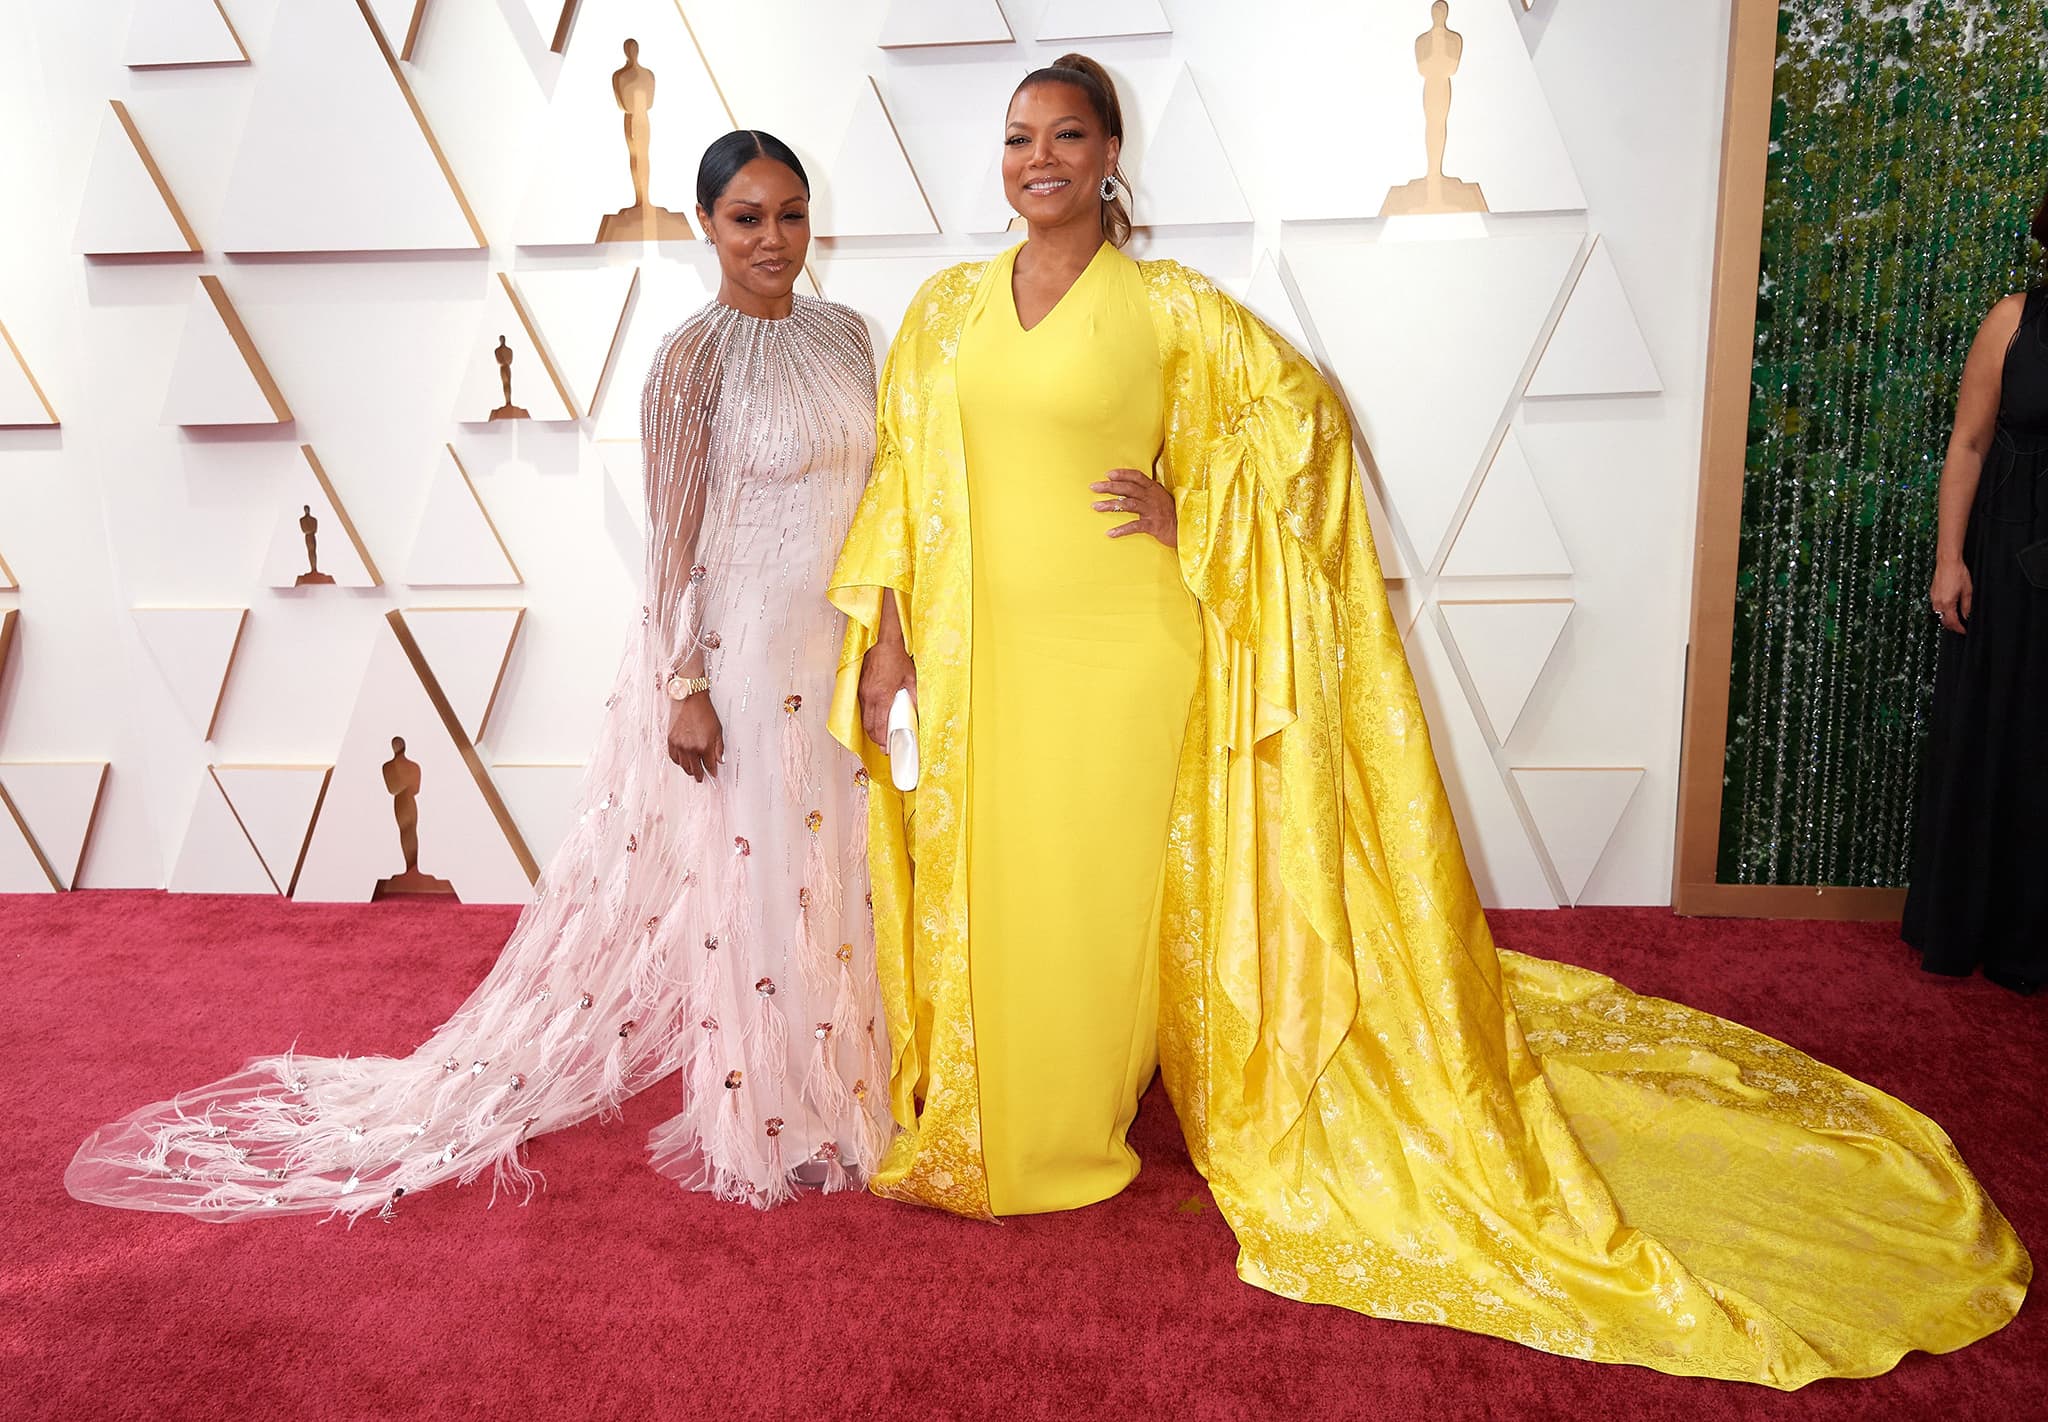 Eboni Nichols and Queen Latifah at the 94th Academy Awards held at the Dolby Theatre at Ovation Hollywood in Los Angeles on March 27, 2022